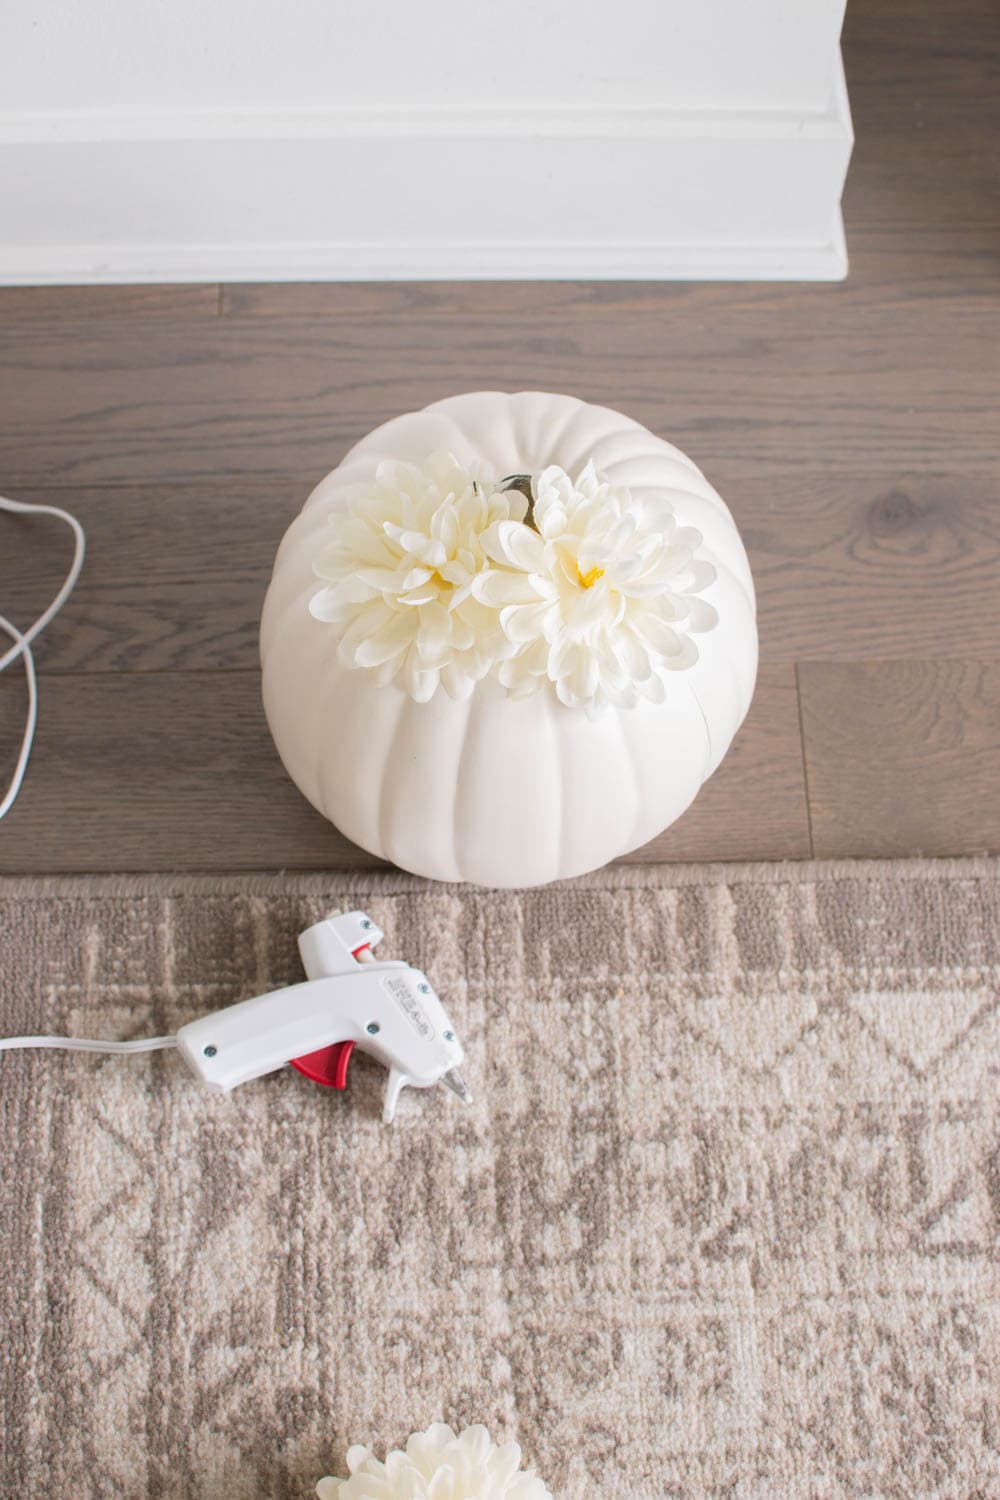 Gluing faux flower buds on a white plastic pumpkin